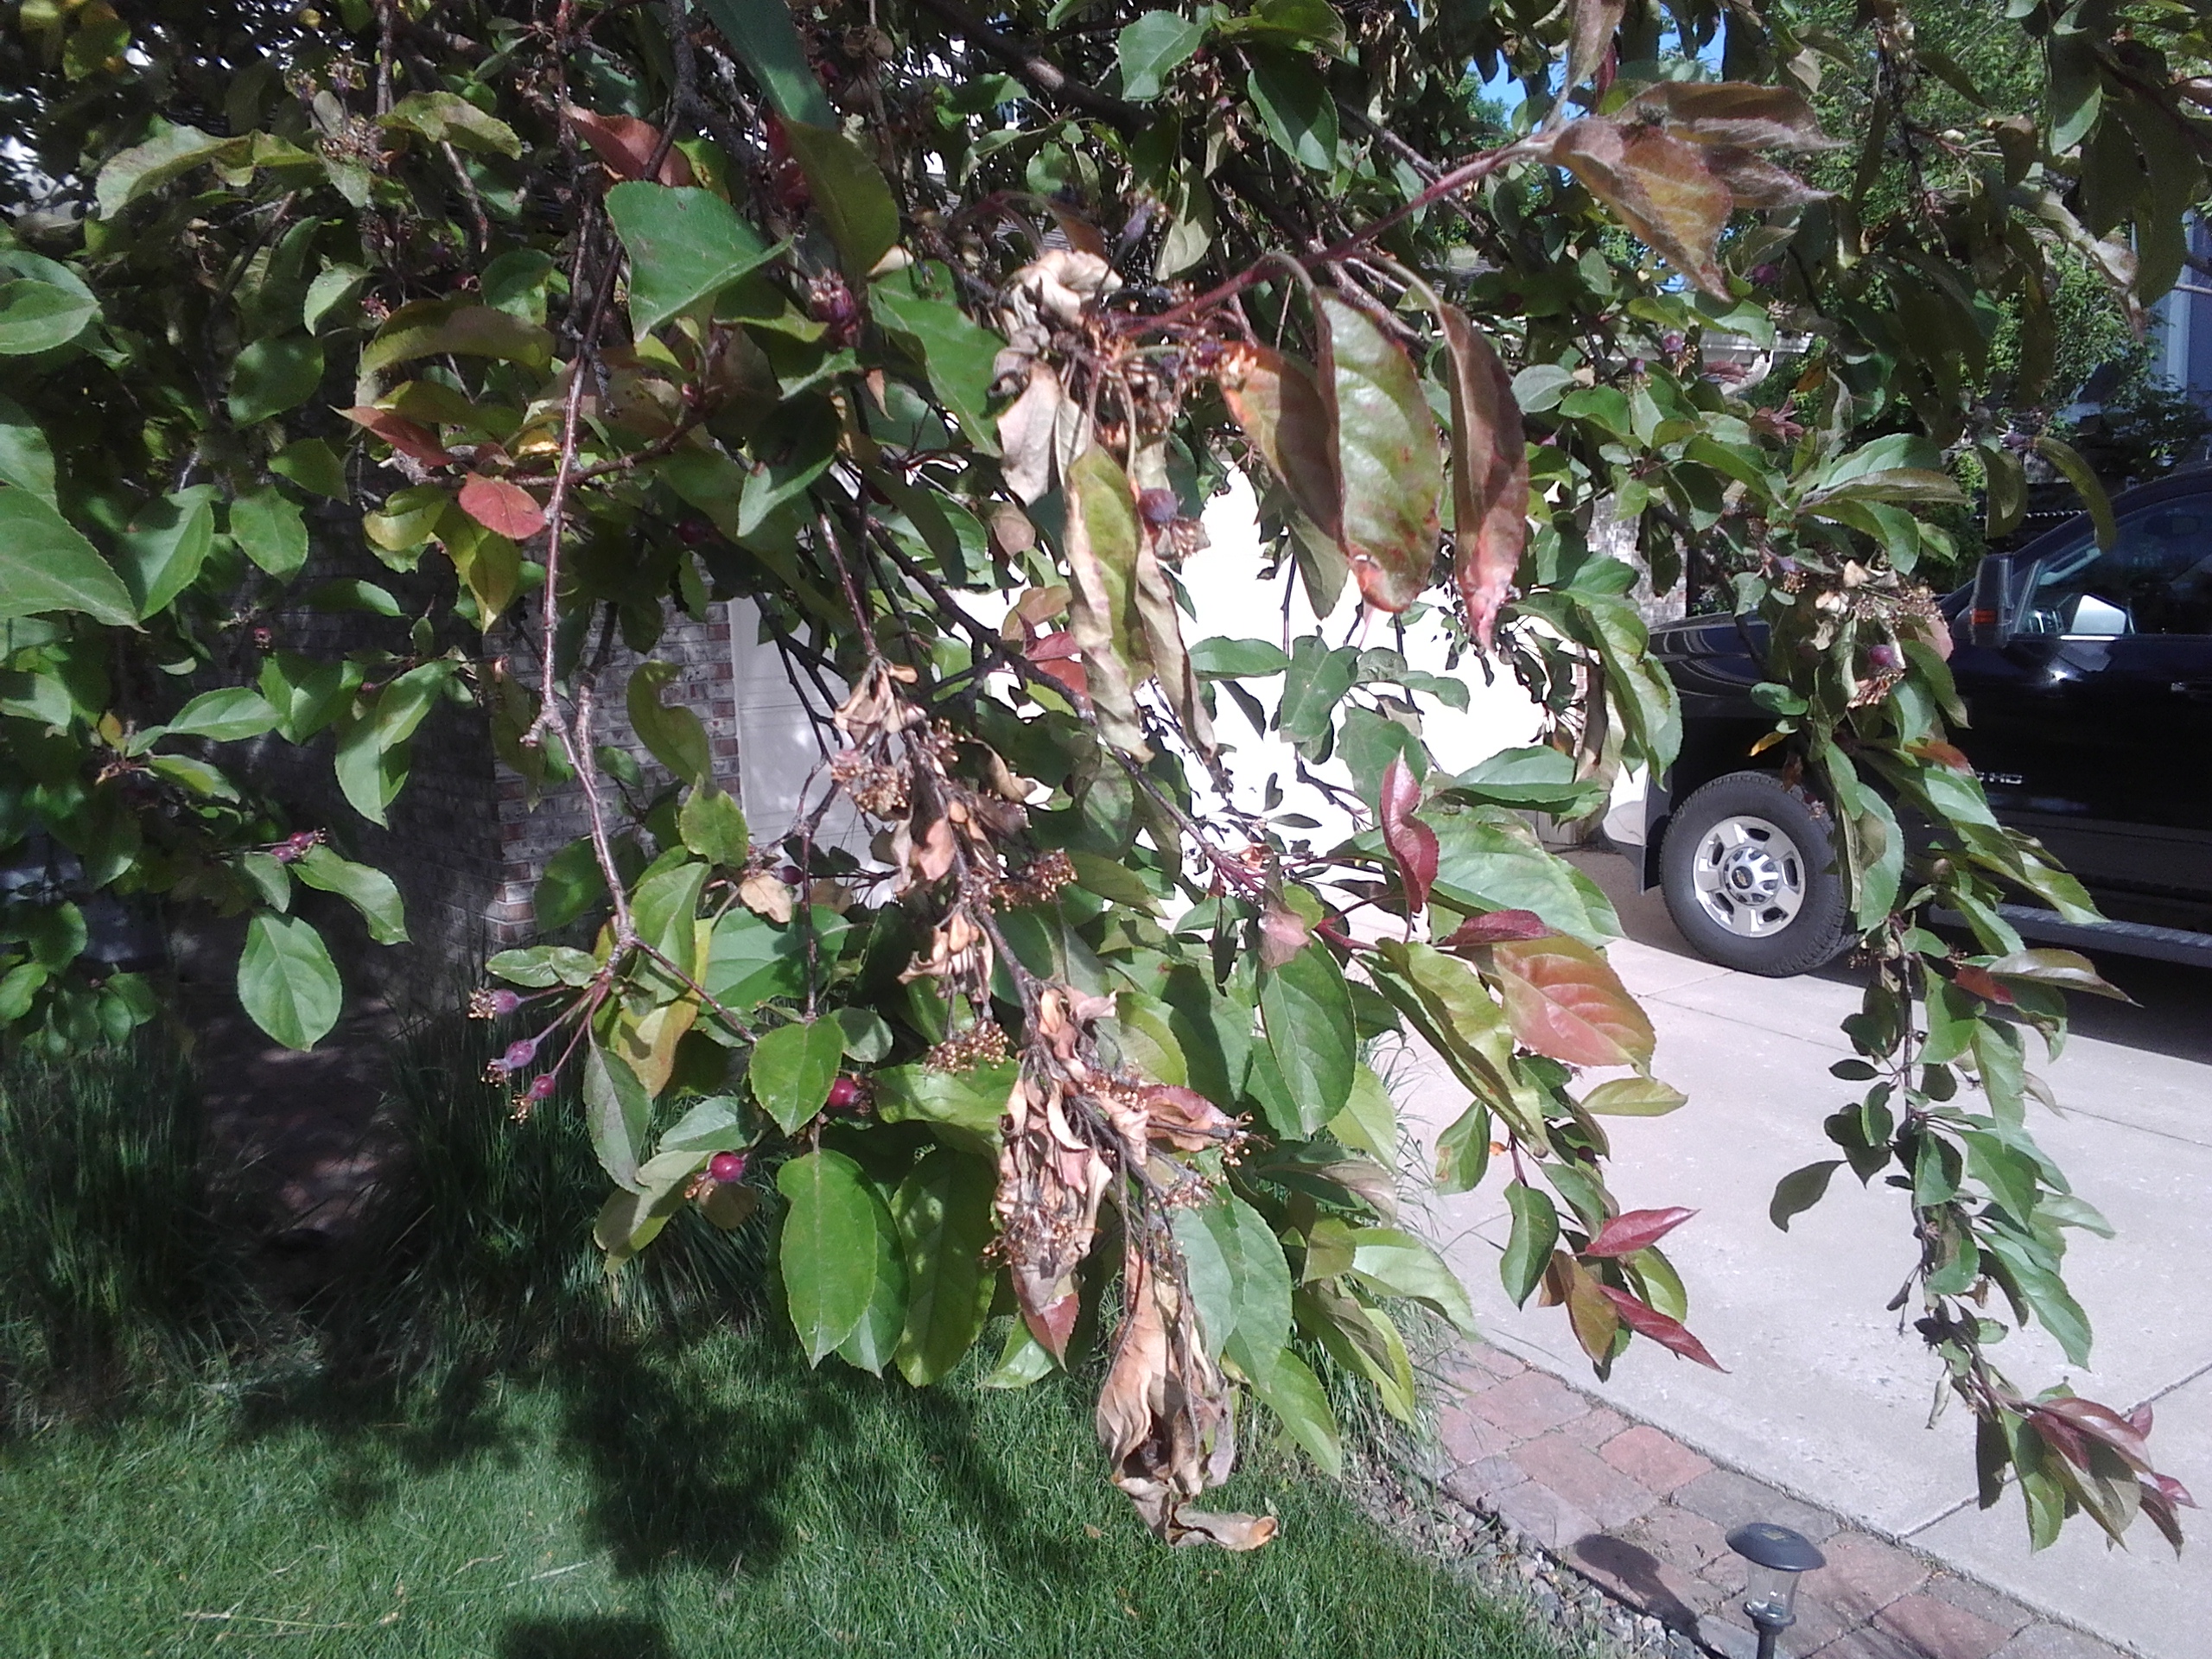 Visible brown damage on tree leaves in south Denver, CO that requires urgent fire blight treatment.